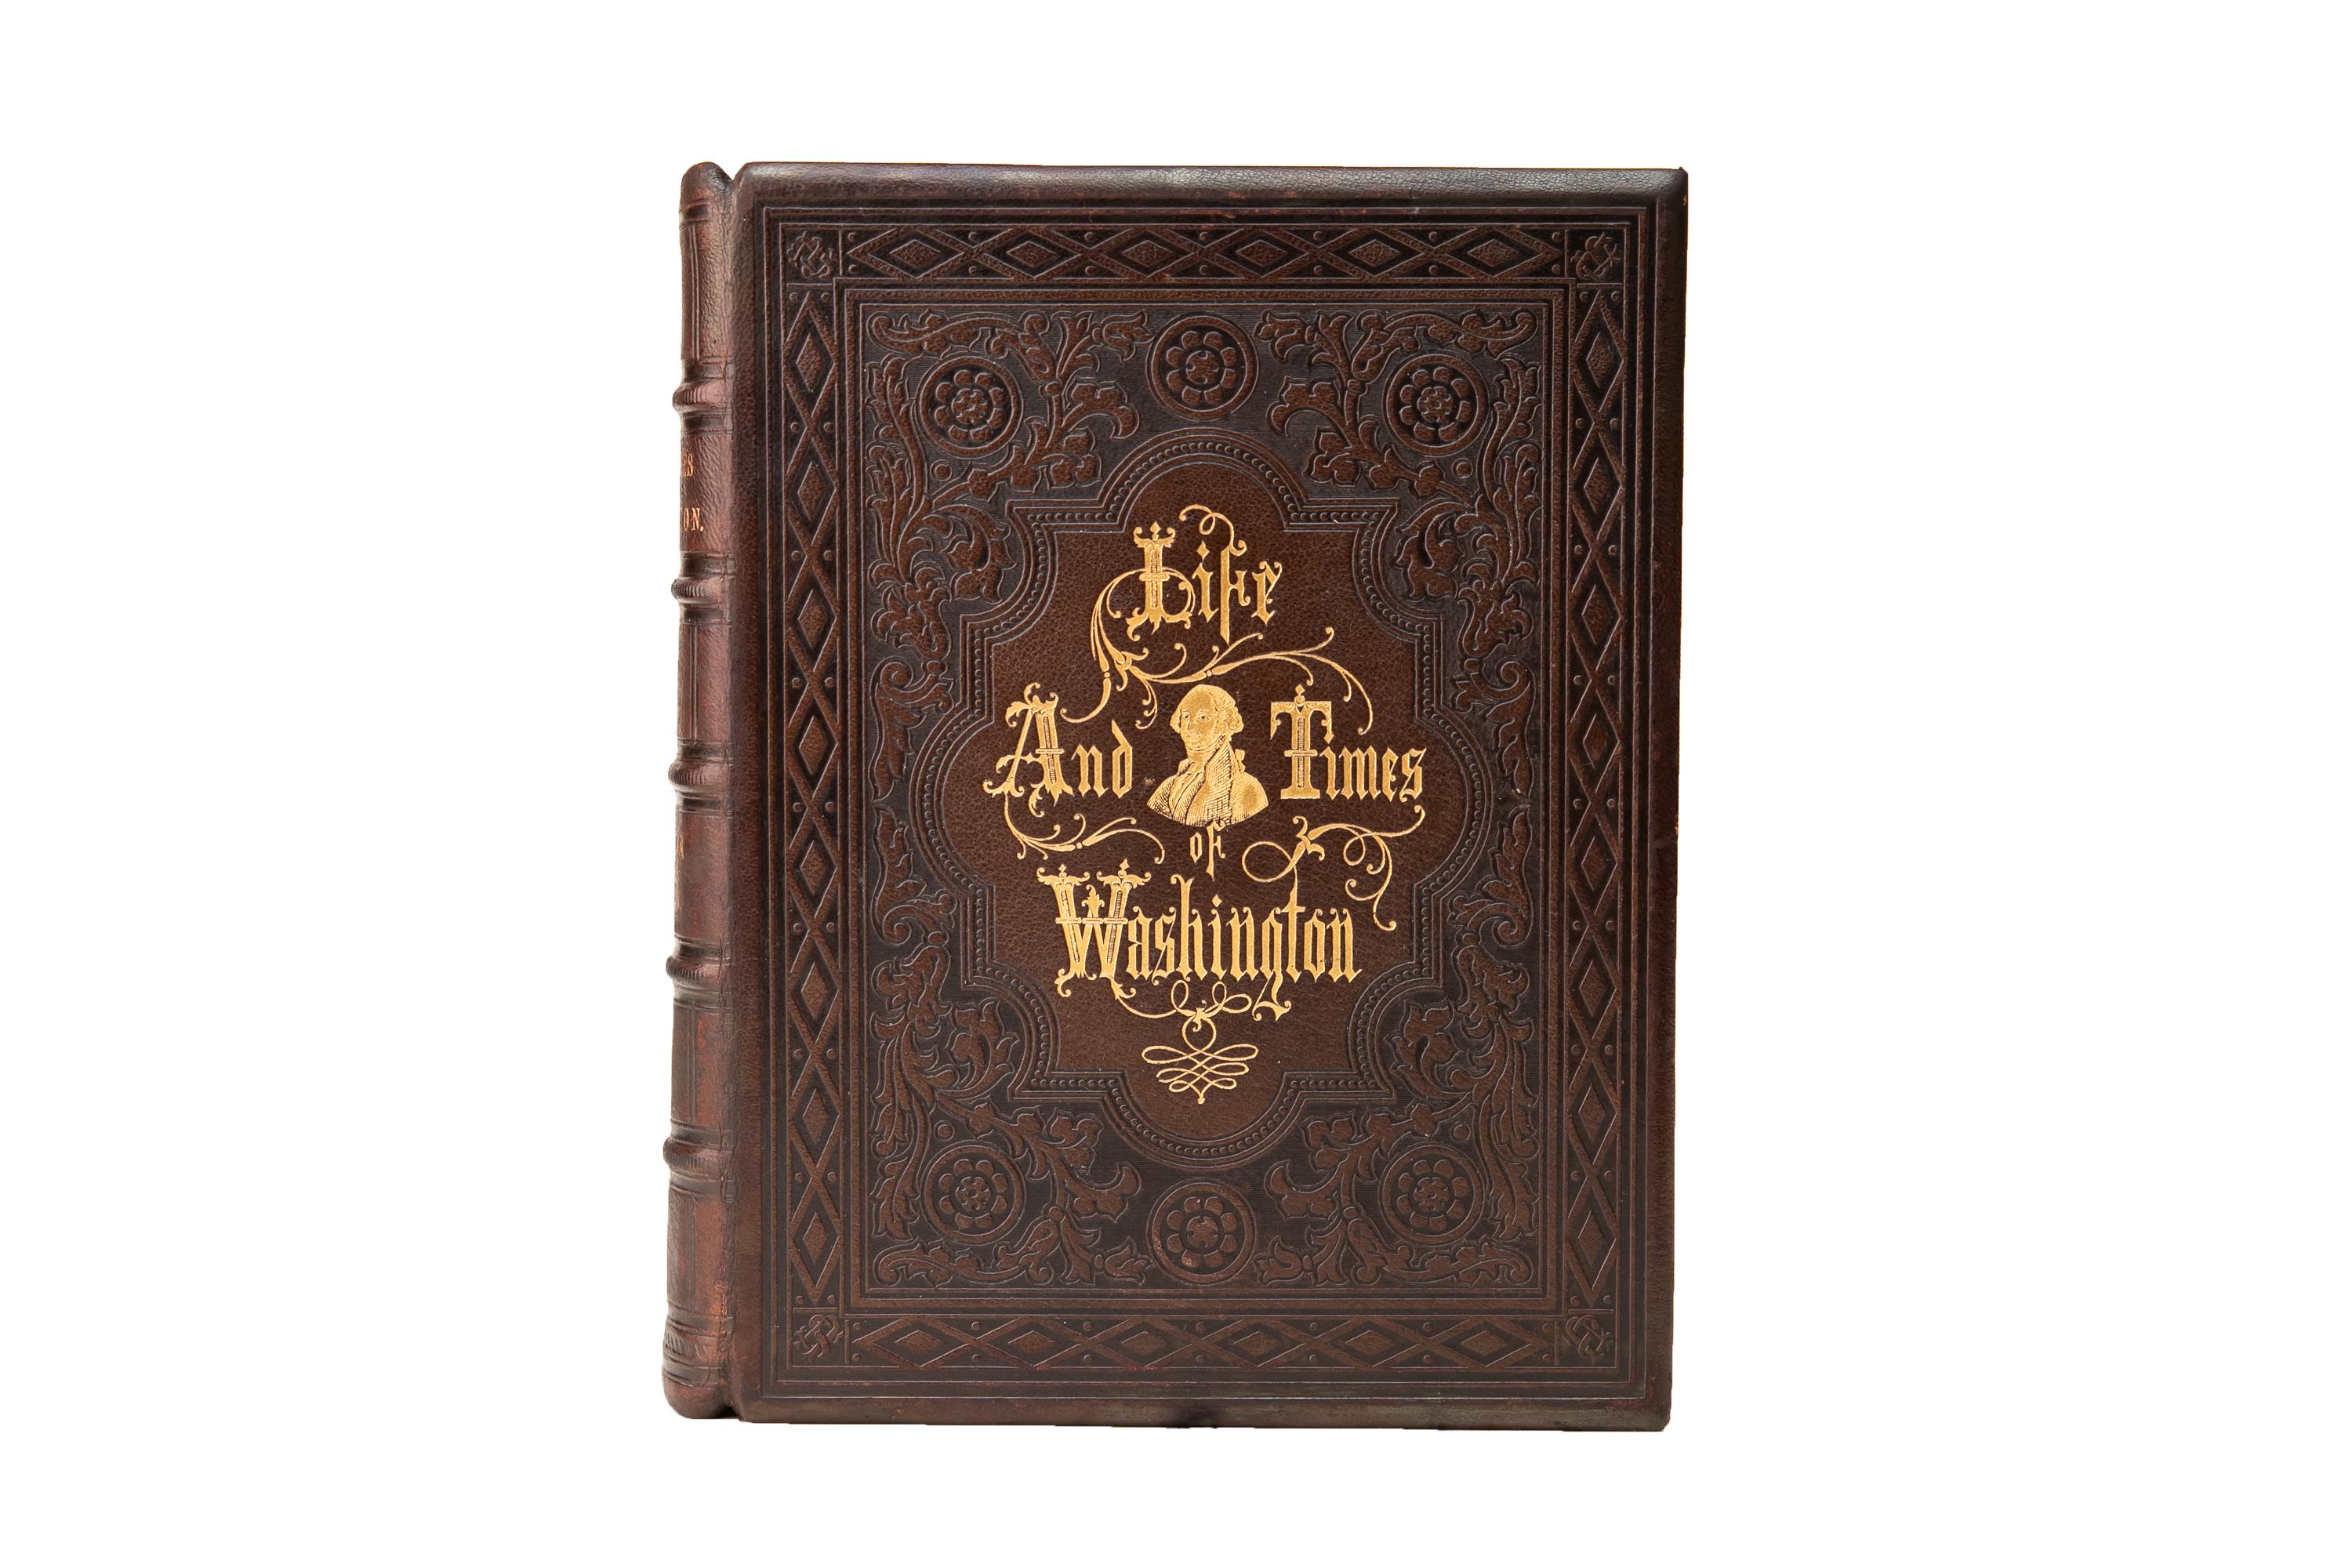 2 Volumes. J.F. Schroeder, The Life and Times of Washington. Bound in full brown morocco with the covers and raised band spines displaying ornate open and gilt-tooled detailing. All of the edges are gilt. Illustrated with highly-finished steel